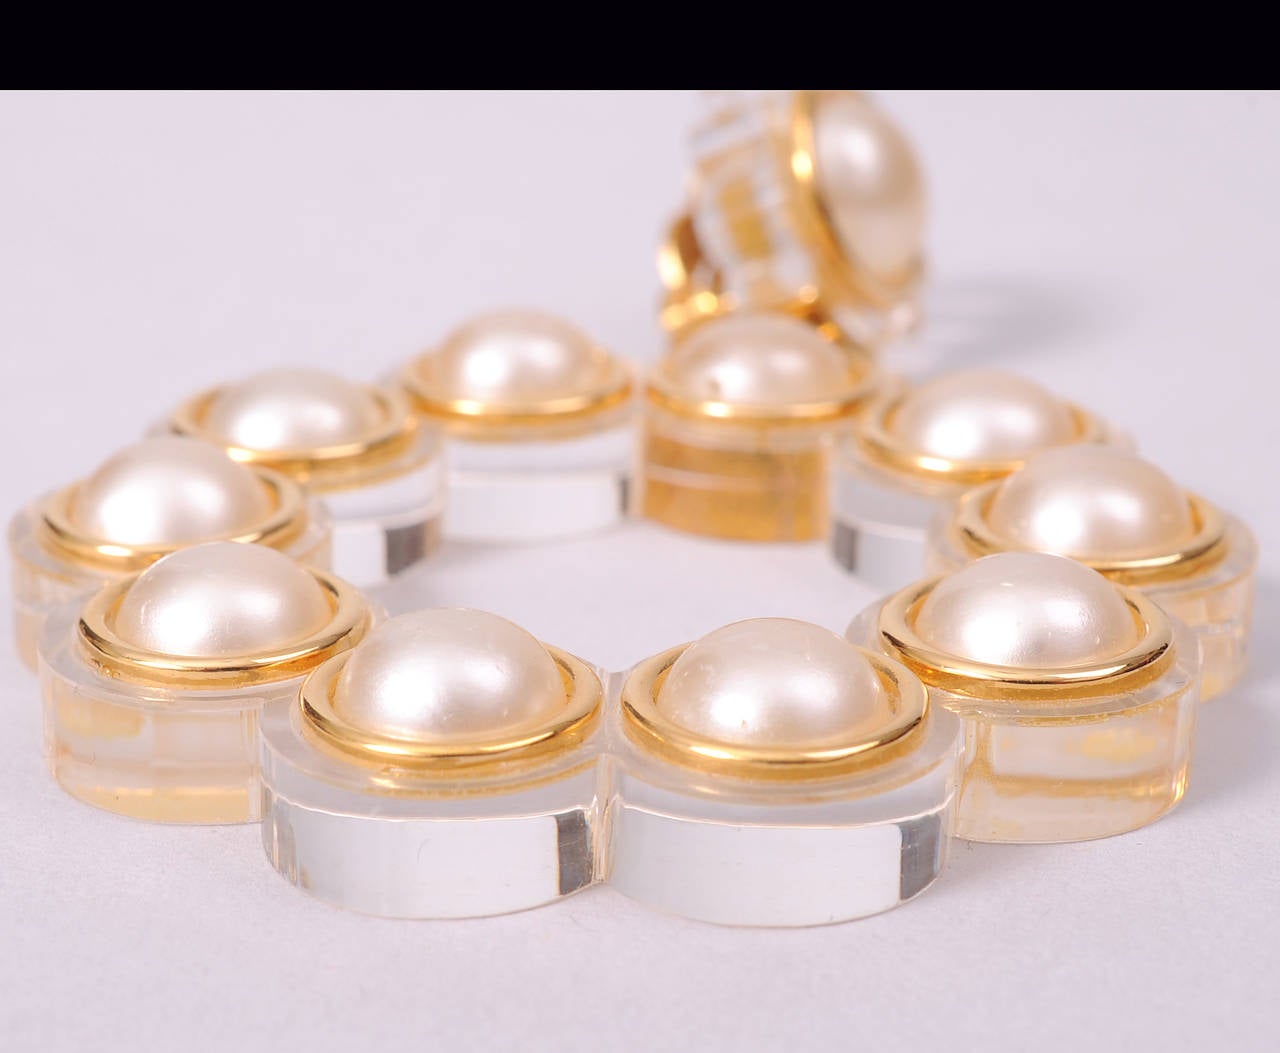 These oversized 1970's inspired runway worn Lucite earrings have a carved Lucite flower centered by a pearl at the top and a scalloped Lucite hoop with 10 matching pearls centered on each curve. All of the pearls are surrounded by gold toned metal